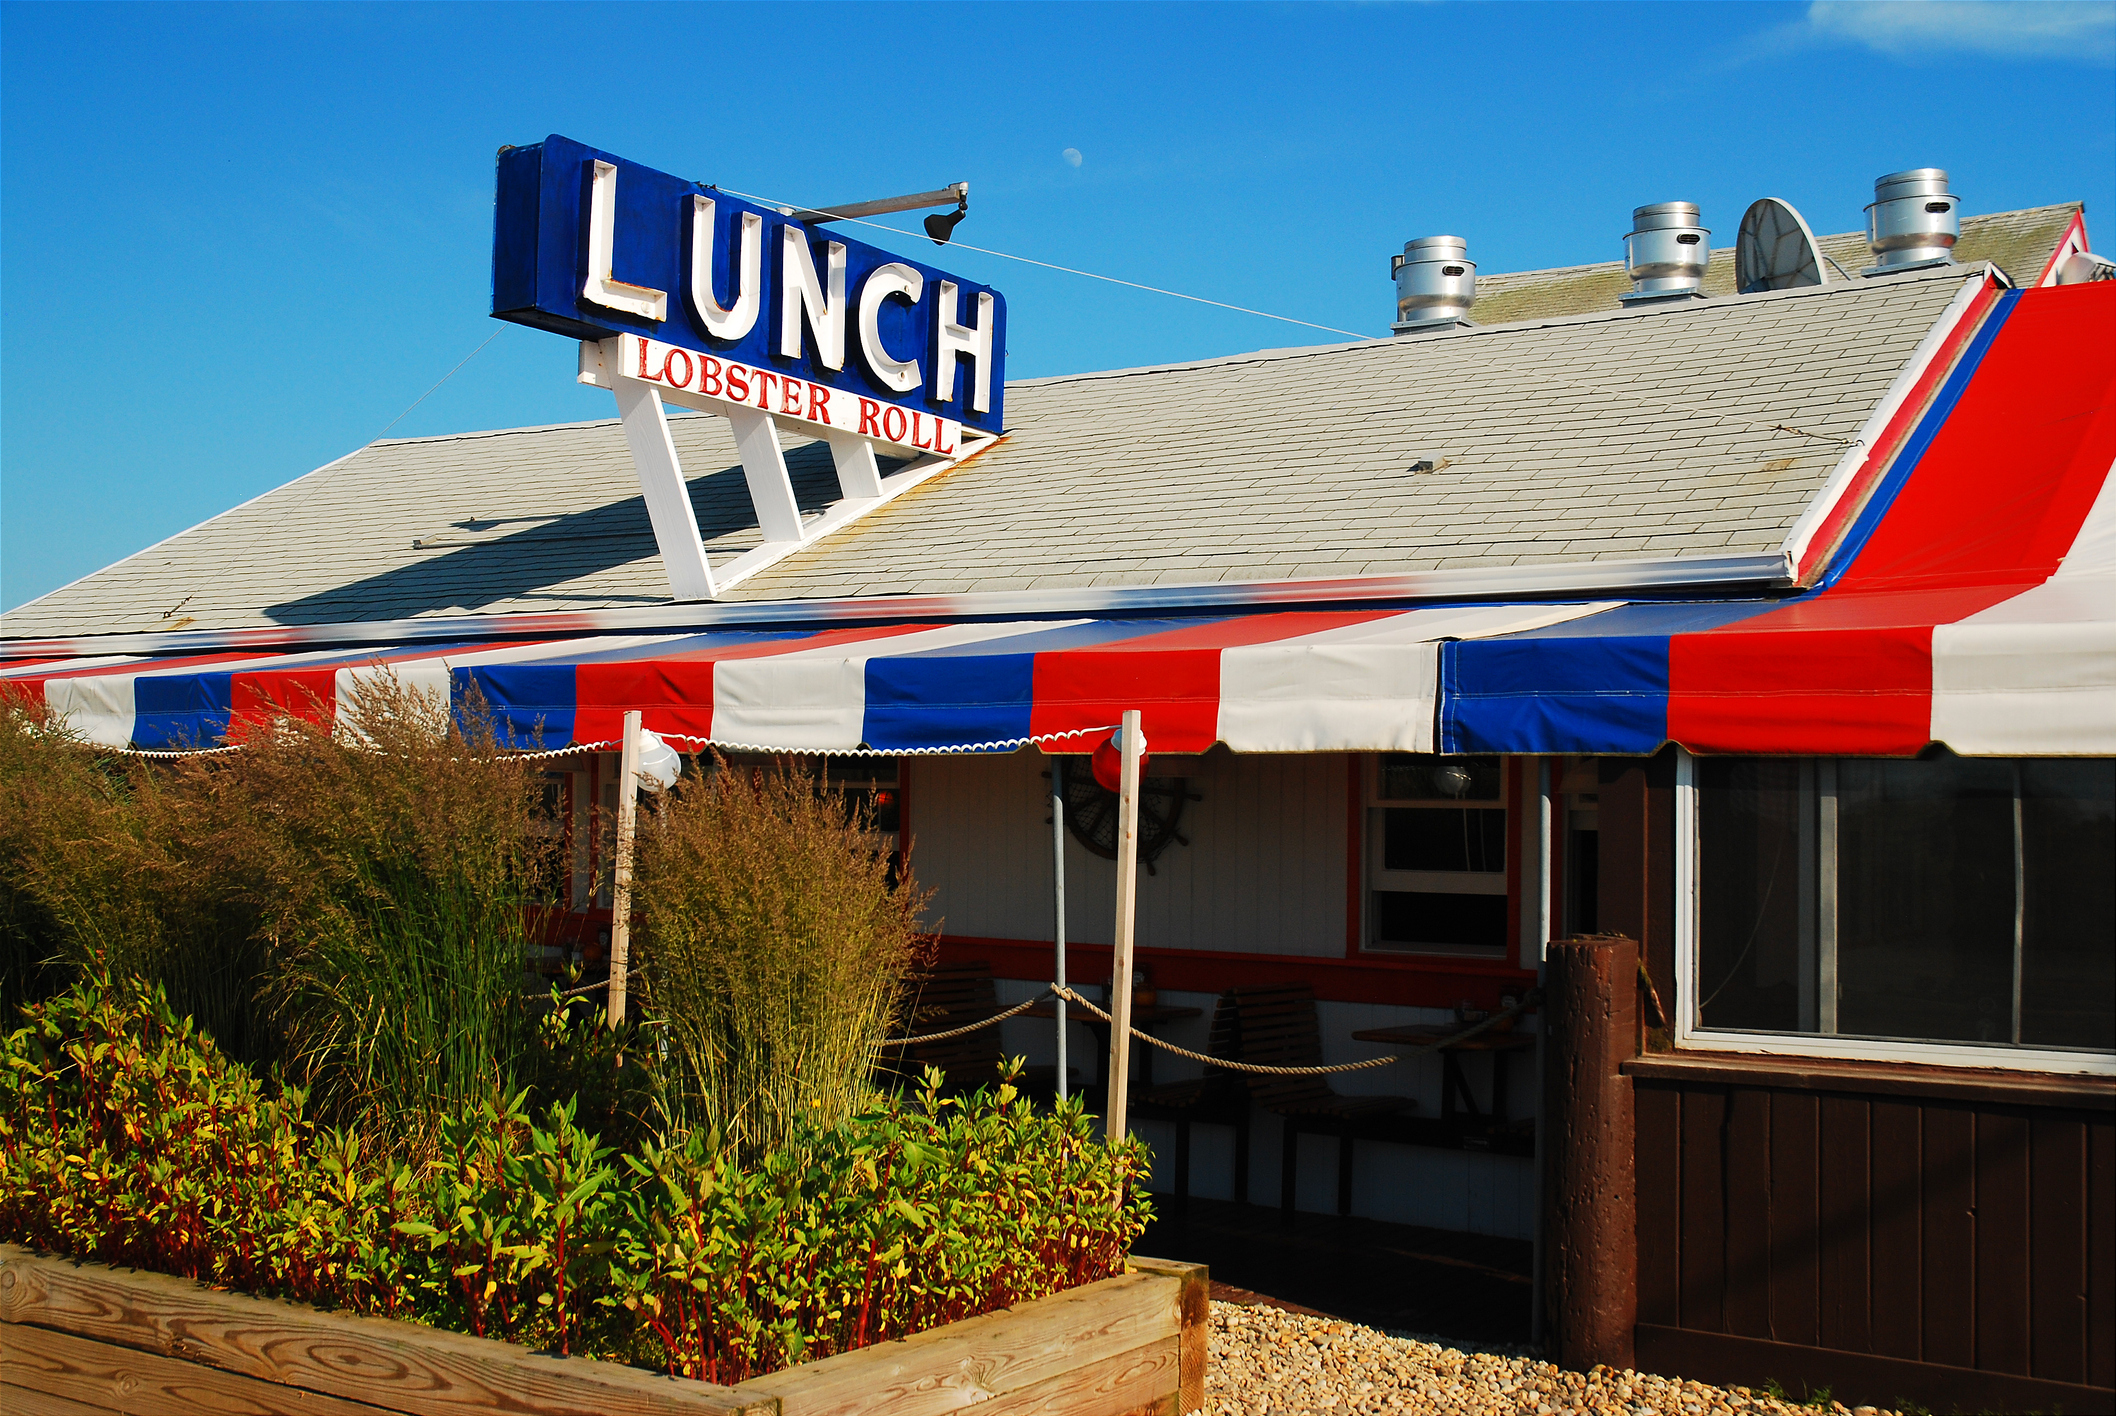 Exterior of the Lobster Roll aka Lunch restaurant in Napeague